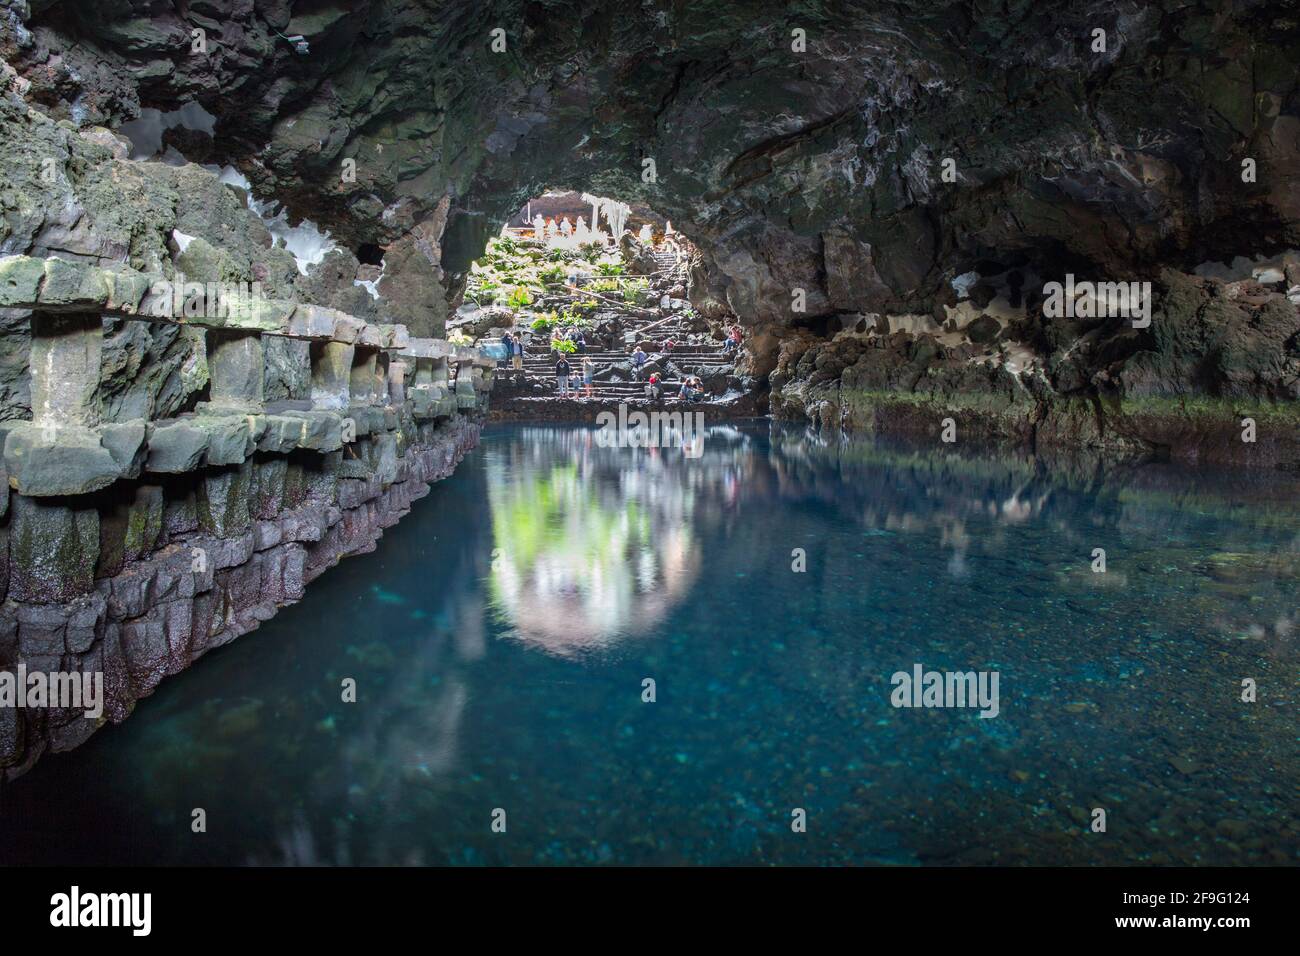 Haría, Lanzarote, Canary Islands, Spain. Clear water pool in collapsed lava tunnel, Jameos del Agua. Stock Photo